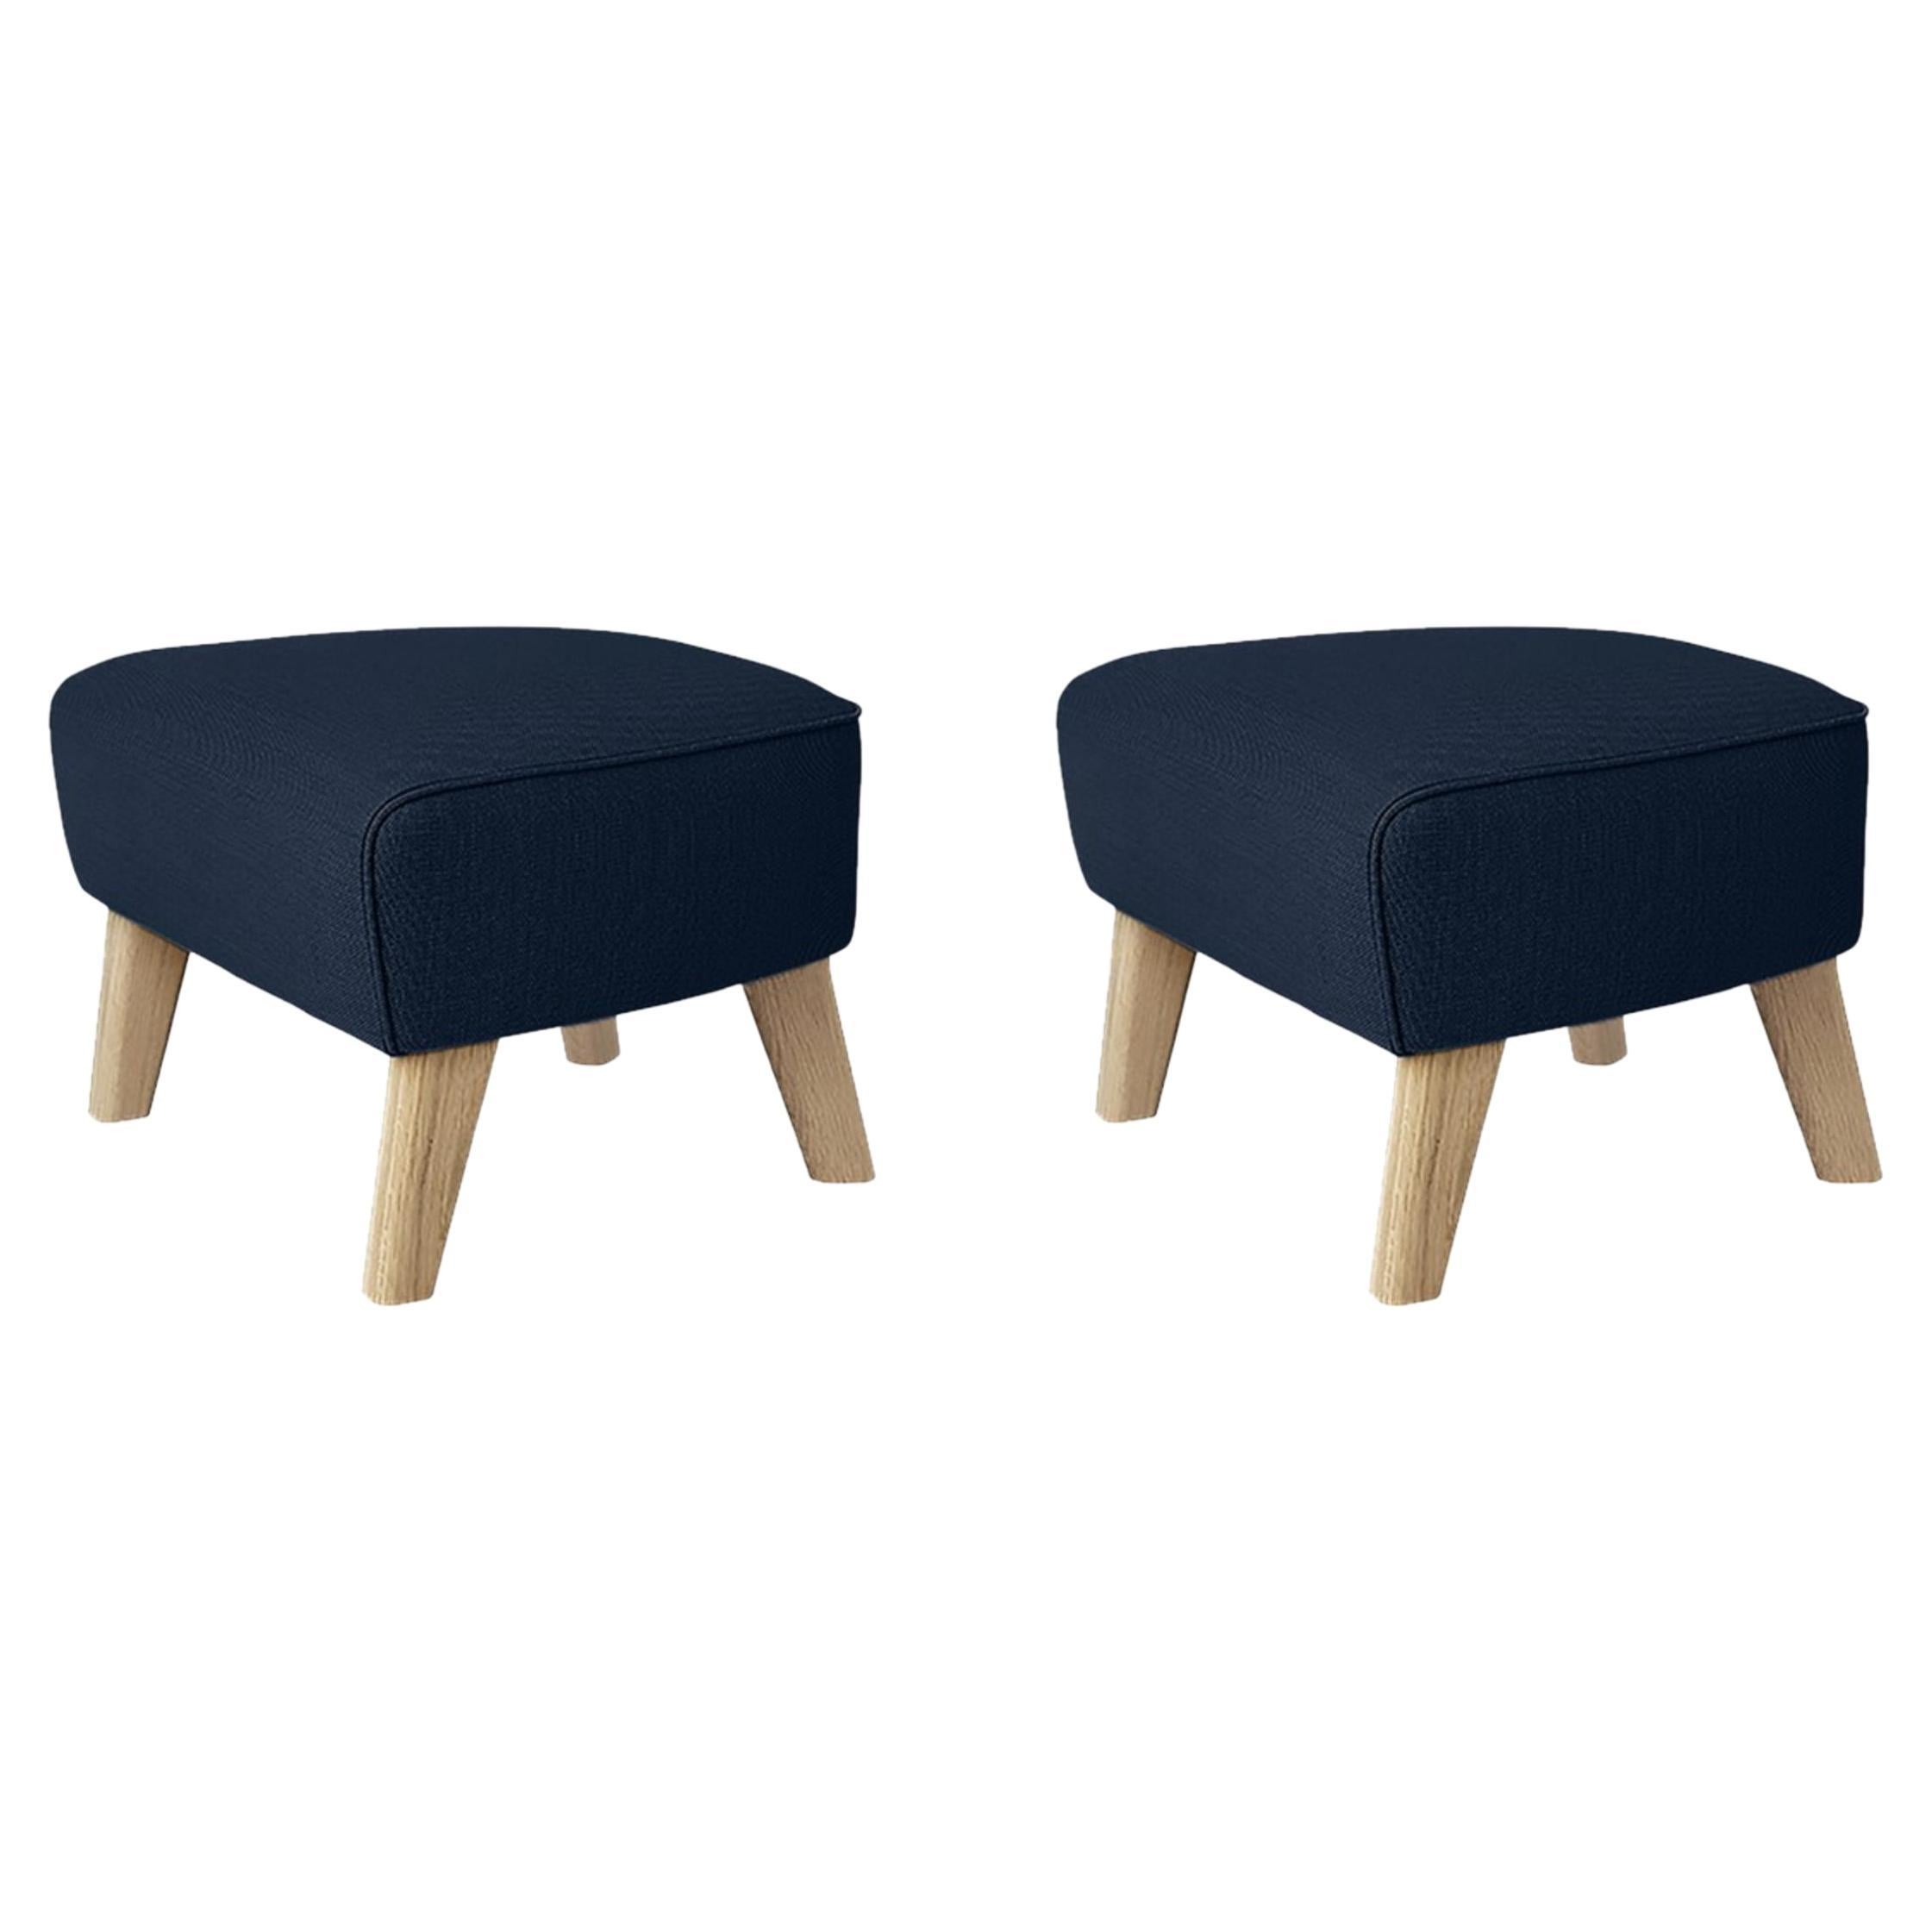 Set of 2 Blue and Natural Oak Sahco Zero Footstool by Lassen For Sale